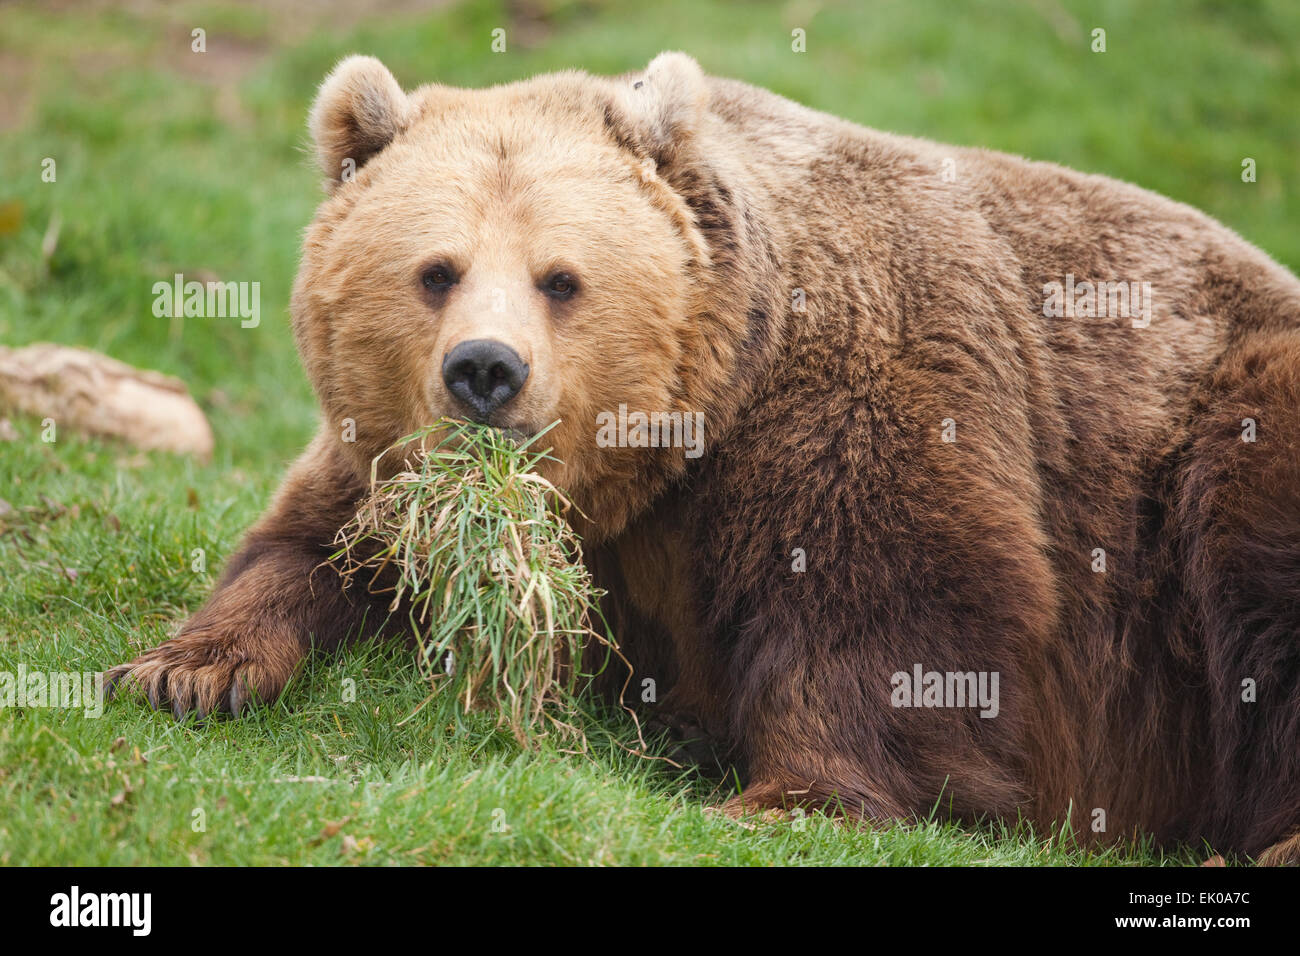 European Brown Bear (Ursus arctos arctos). Omnivorous nature of an animal  described as carnivore shown by grass held in mouth Stock Photo - Alamy